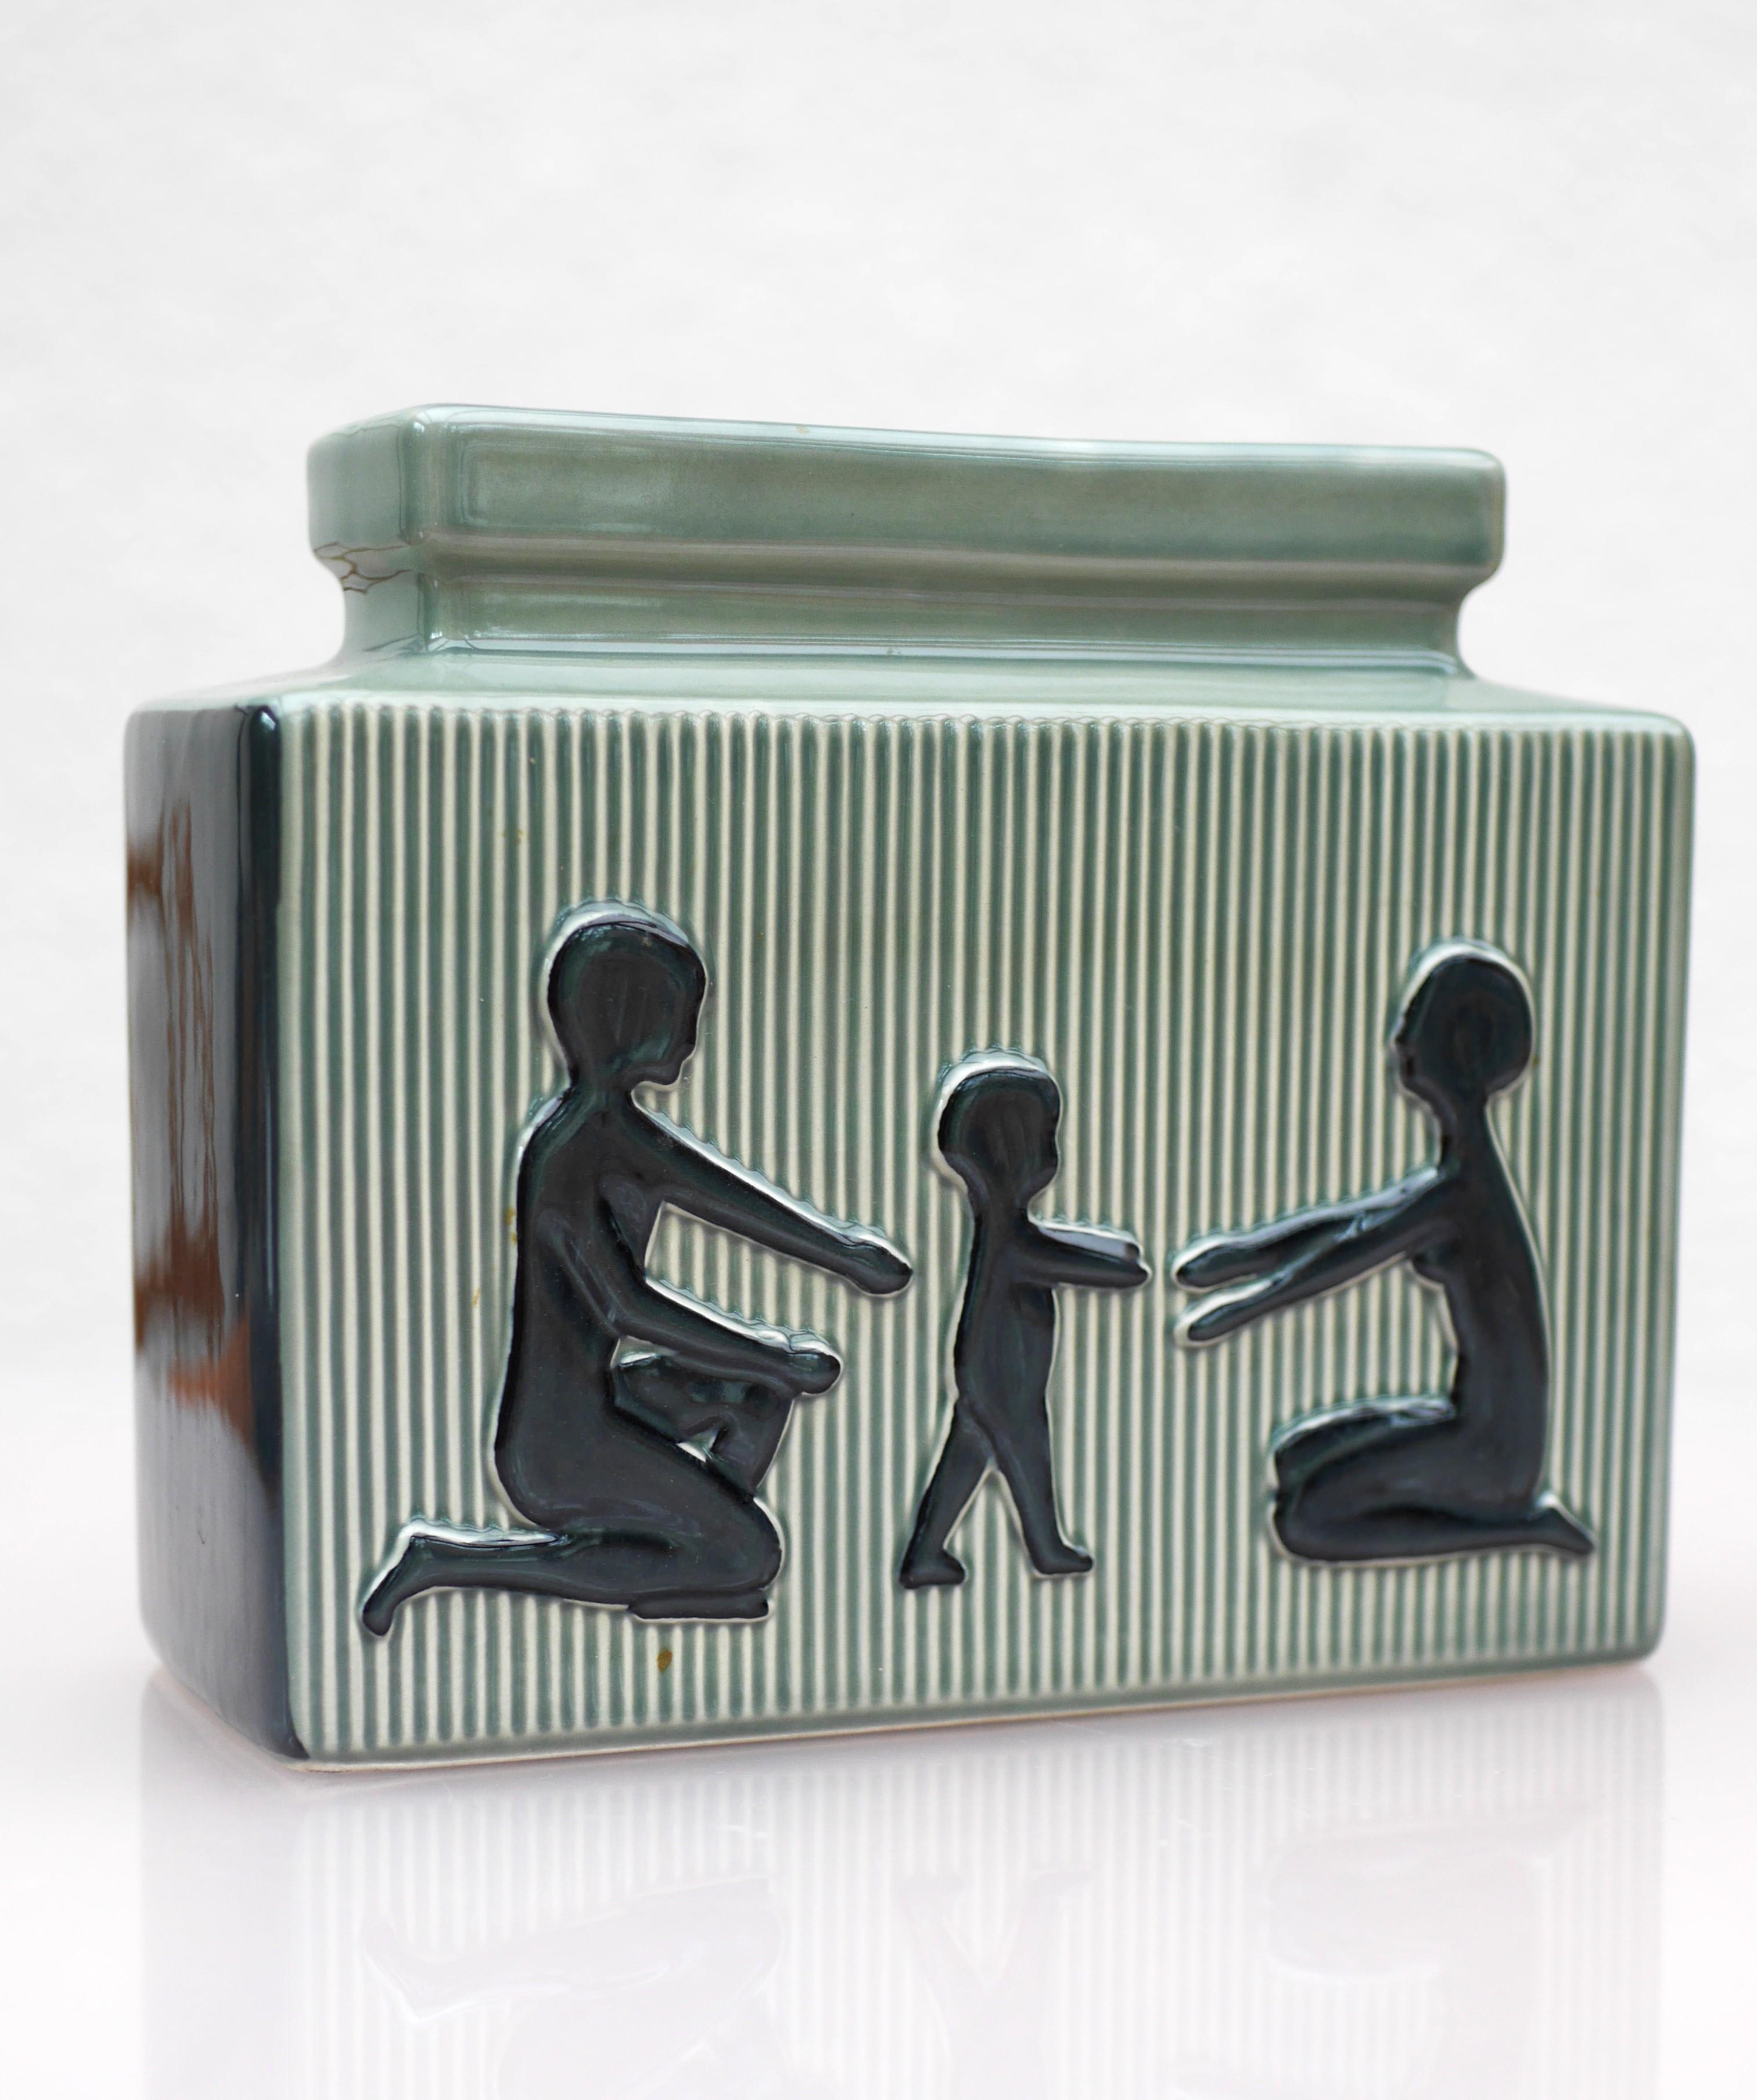 
  Vintage porcelain vase from made by Svend Aage Holm-Sörensen for Söholm, Denmark. An unusual but beautiful ceramic vase made by Einar Johansen for Söholm, Denmark from 1950s. It depicts a child learning to walk, and it has a special feeling to